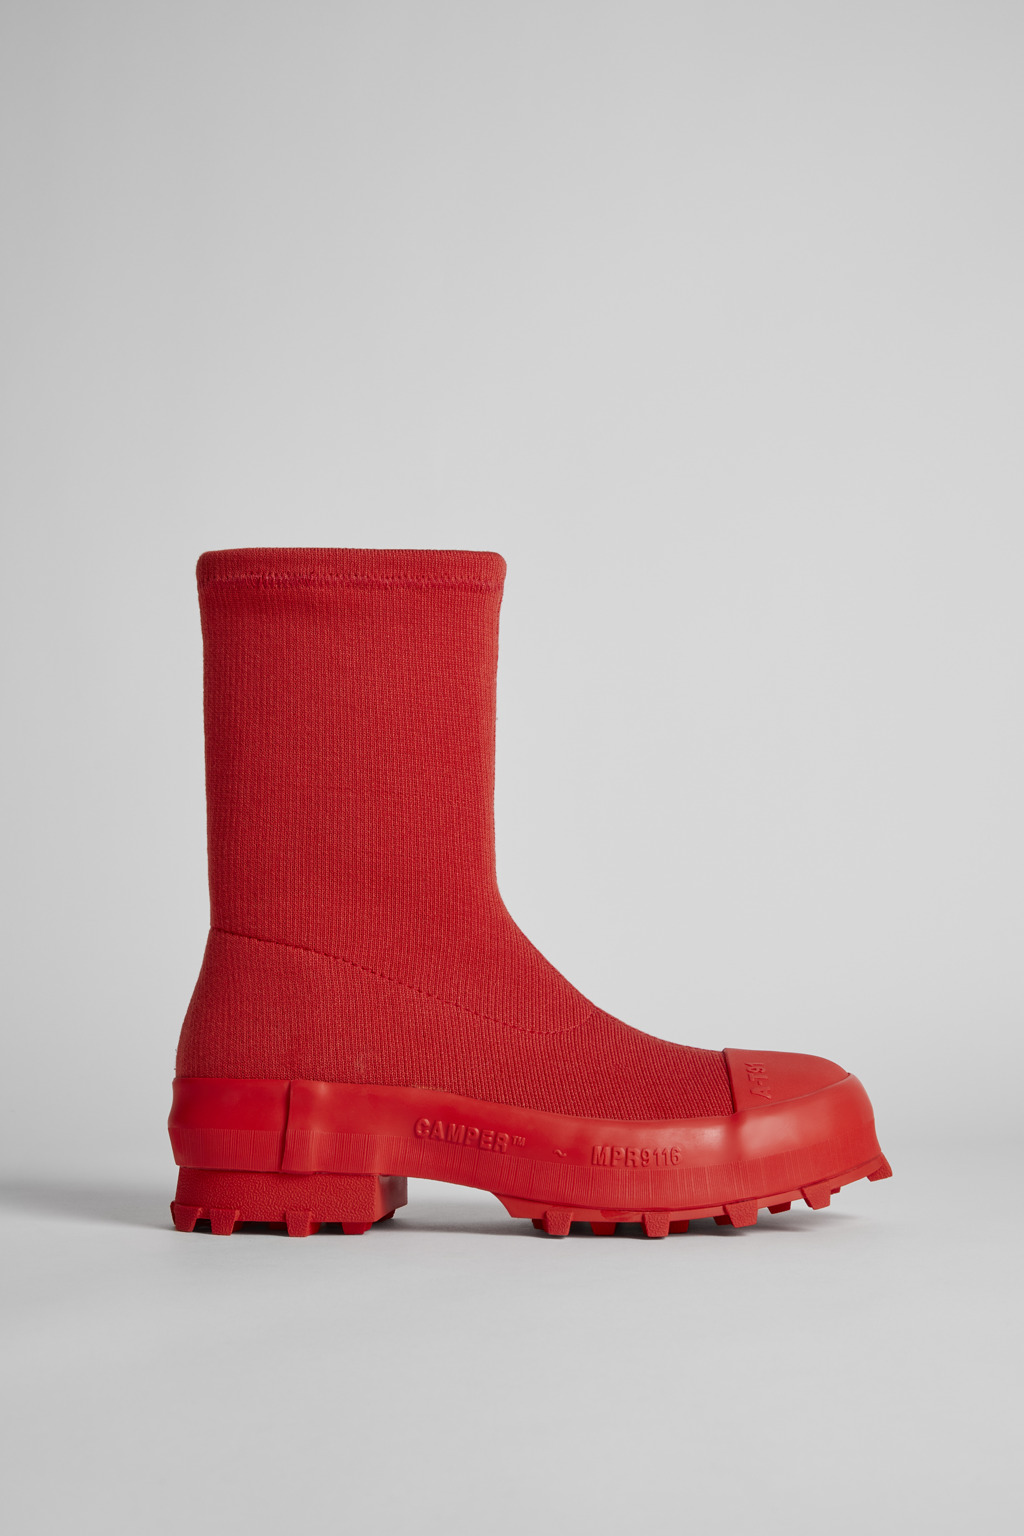 Tracktori Red Boots for Women - Fall/Winter collection - Camper USA